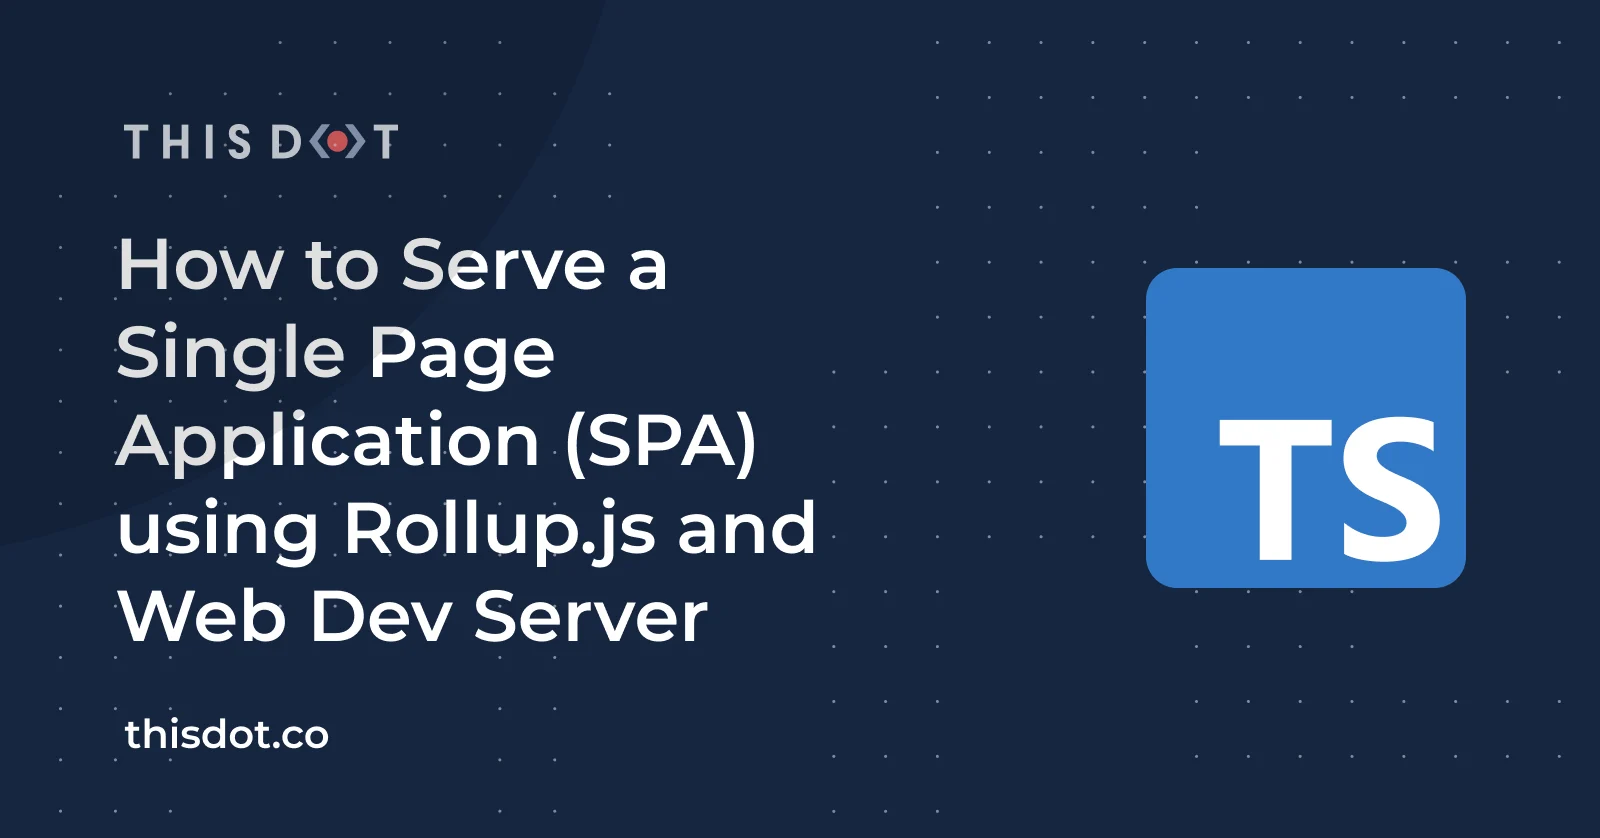 How to Serve a Single Page Application (SPA) using Rollup.js and Web Dev Server cover image